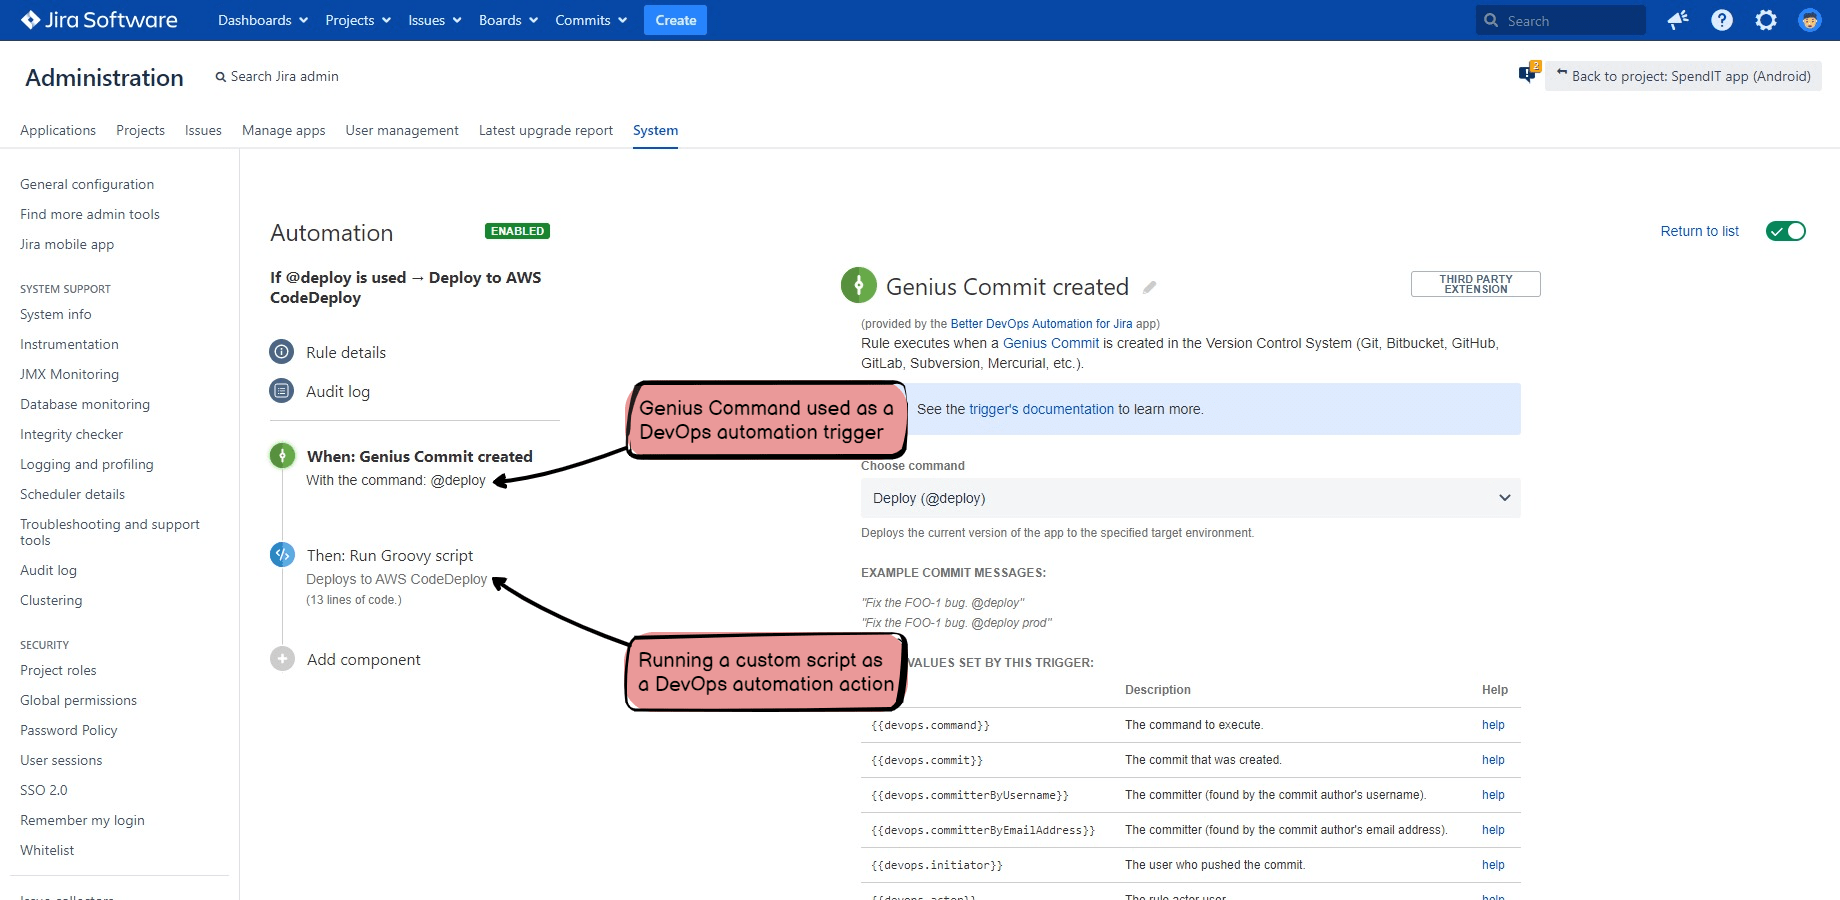 A DevOps Automation for Jira rule using a Genius Command for continuous deployment